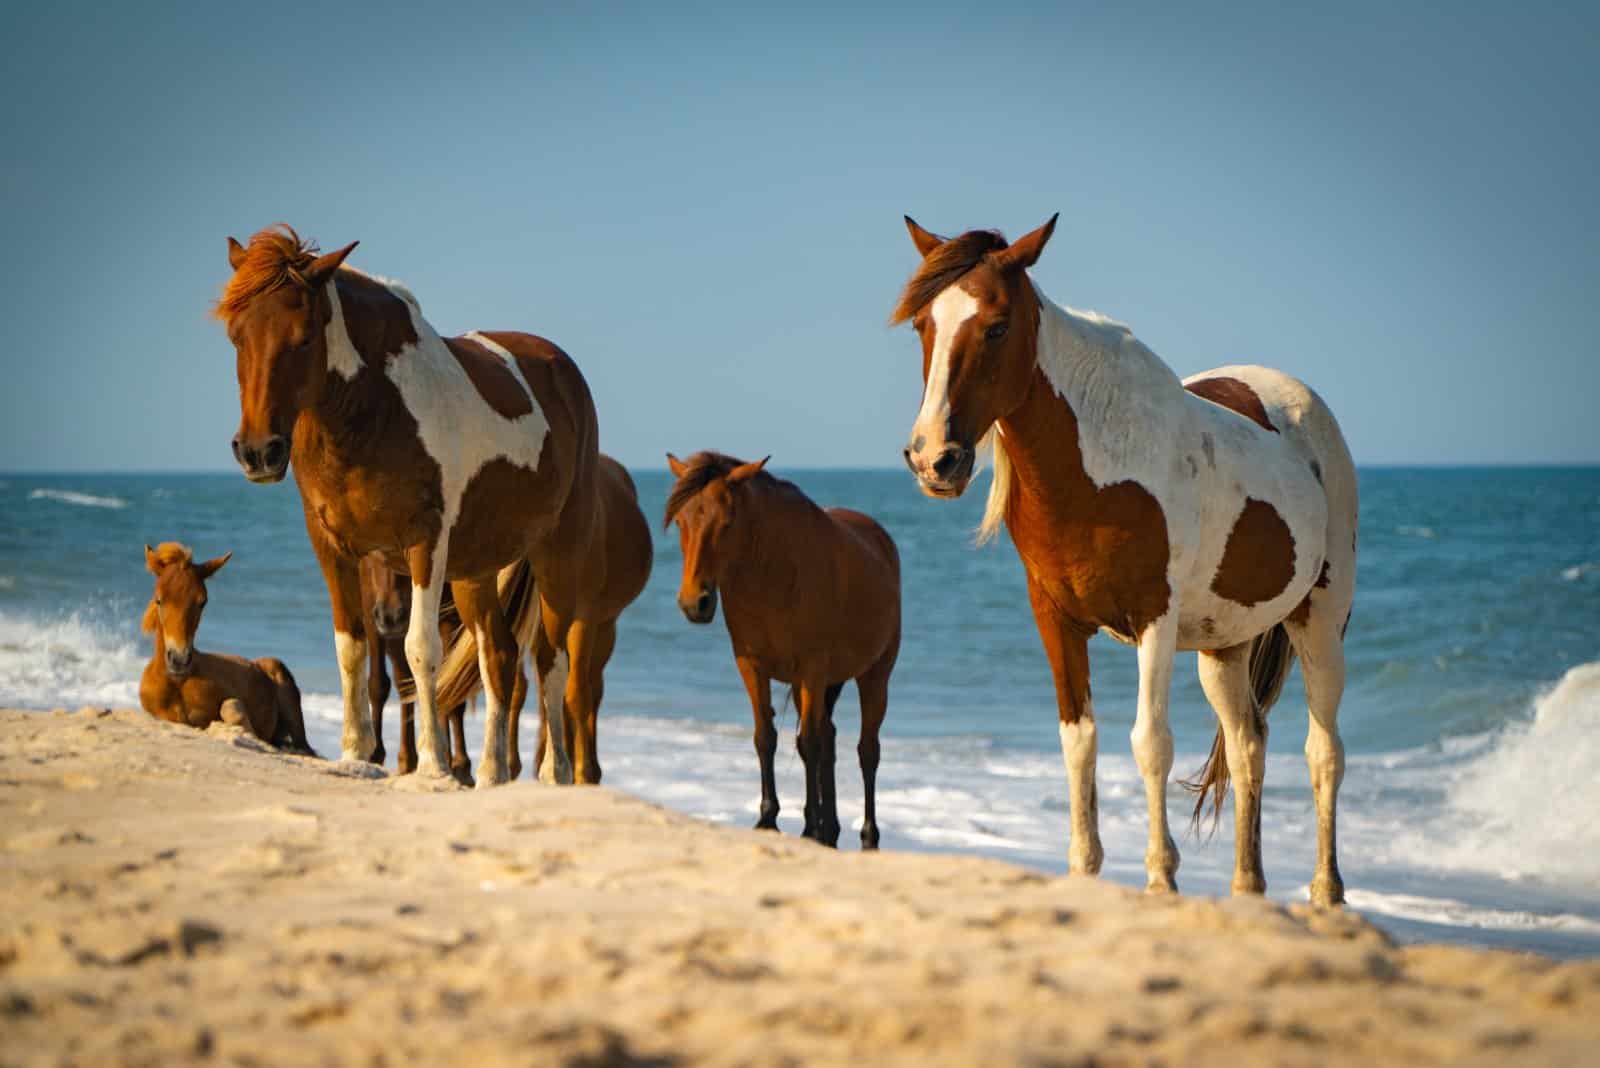 <p class="wp-caption-text">Image Credit: Shutterstock / amygofish</p>  <p><span>Meet the wild ponies and enjoy the serene beaches. These islands offer a quieter beach experience with charming bed and breakfasts or budget-friendly campgrounds.</span></p>